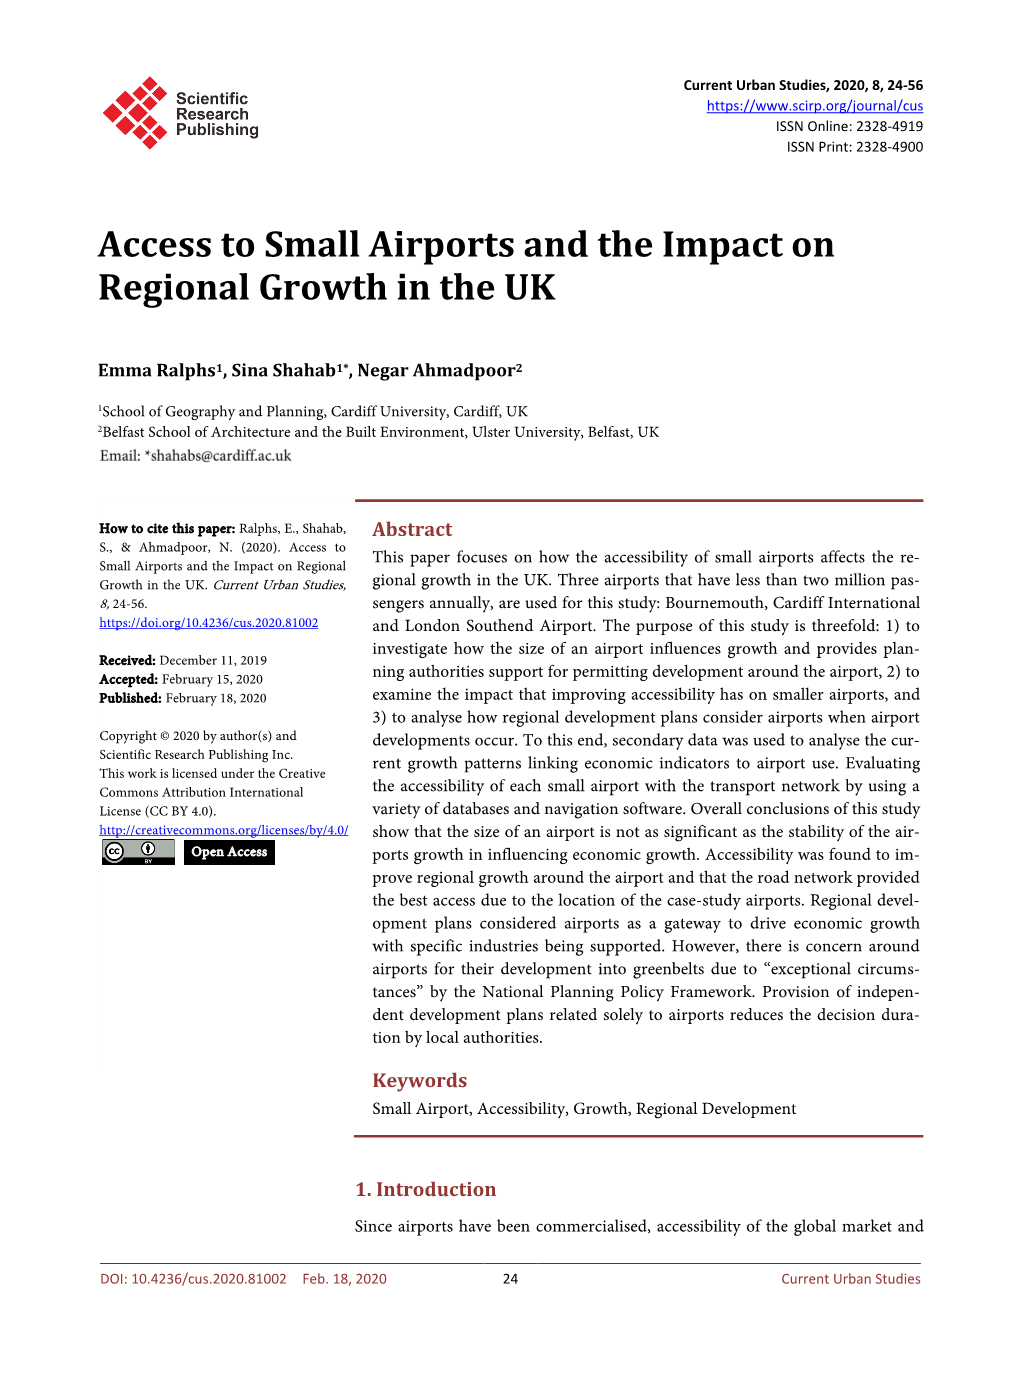 Access to Small Airports and the Impact on Regional Growth in the UK